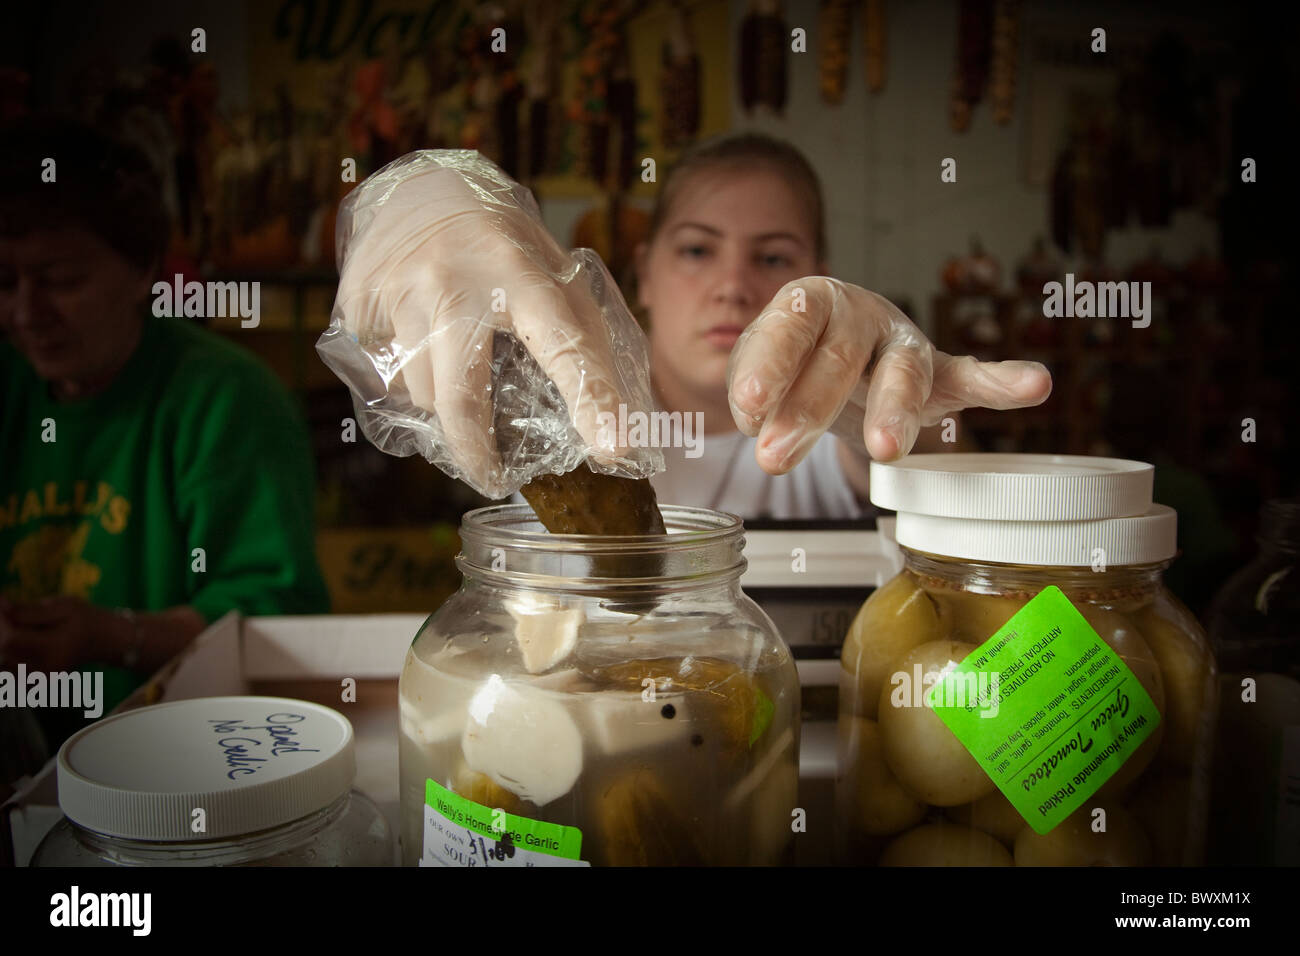 woman takes pickle from jar at deli Stock Photo